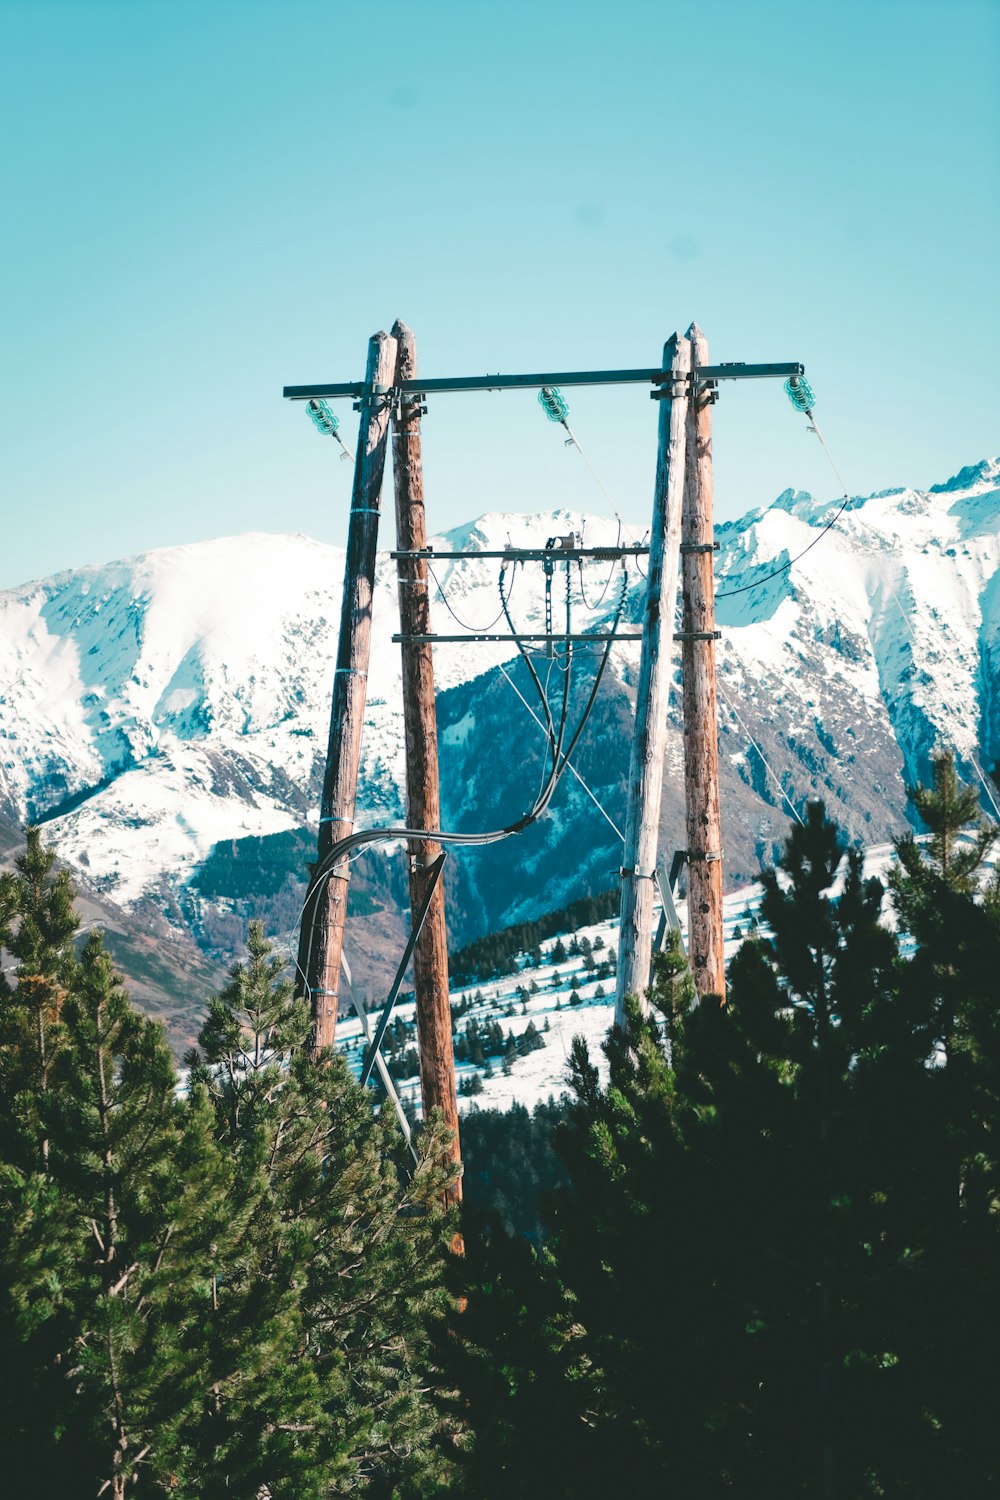 a ski lift in the middle of a snowy mountain range